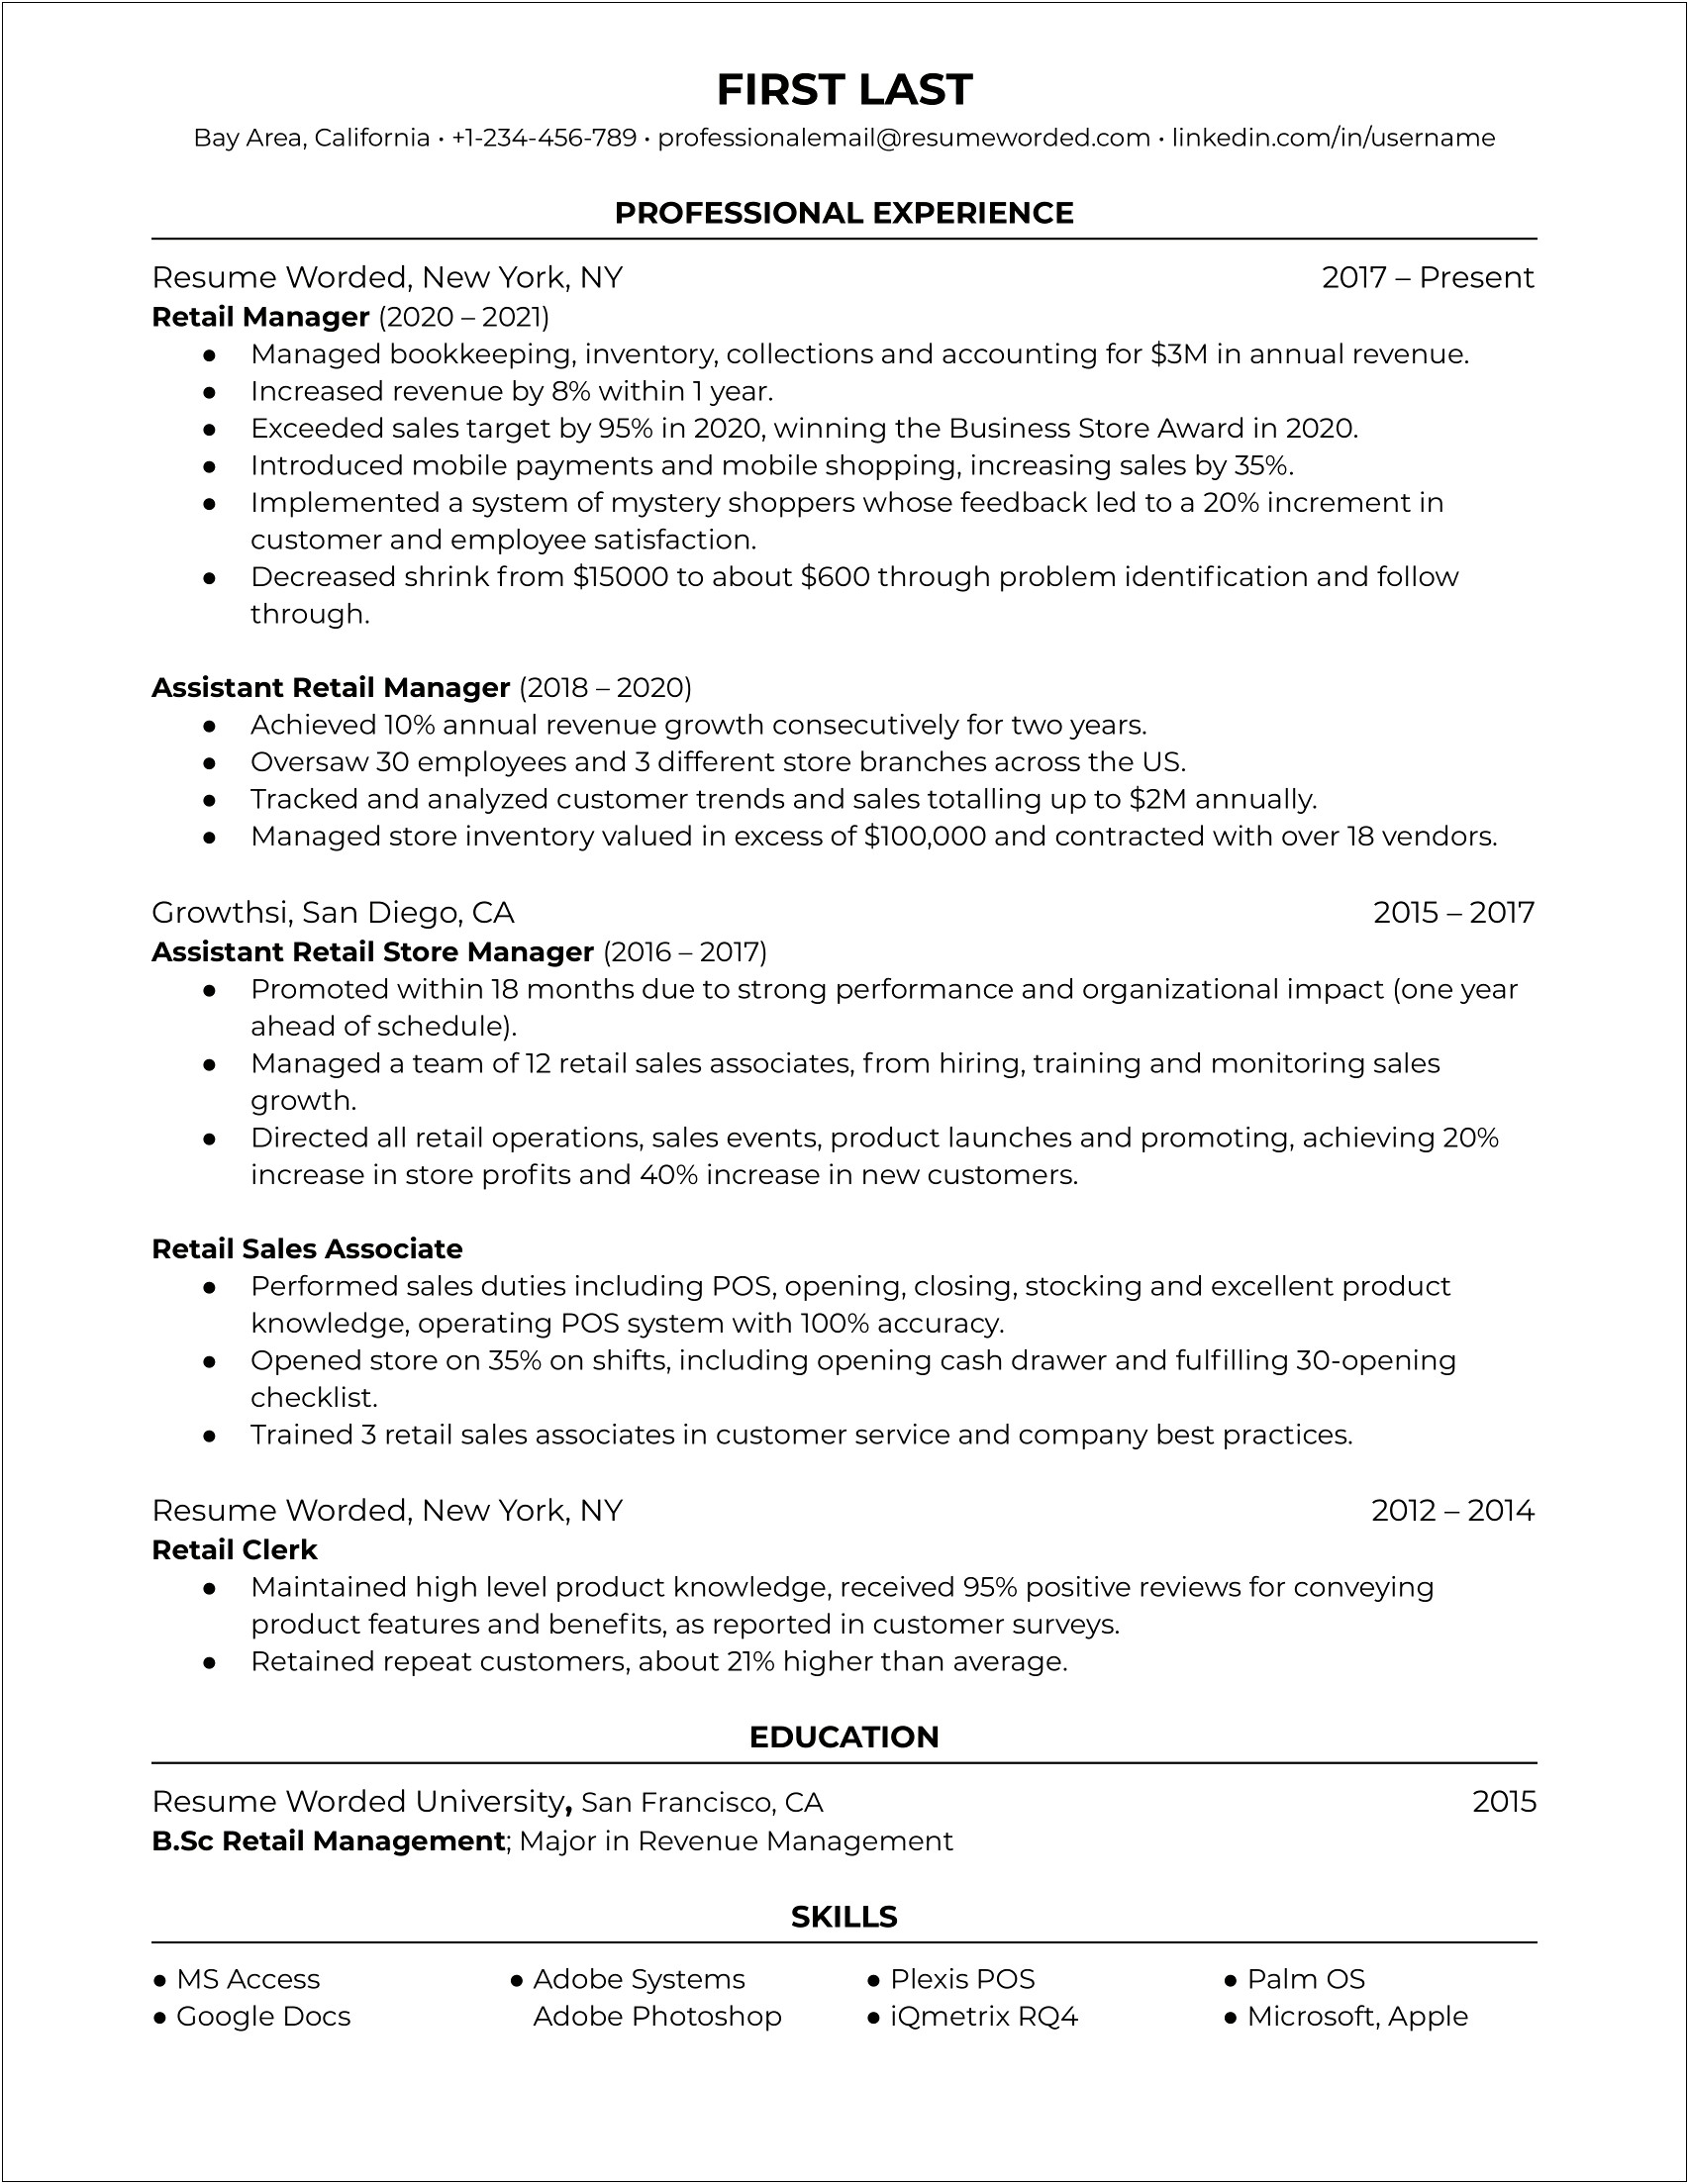 Resume Objective For Retail Management Position